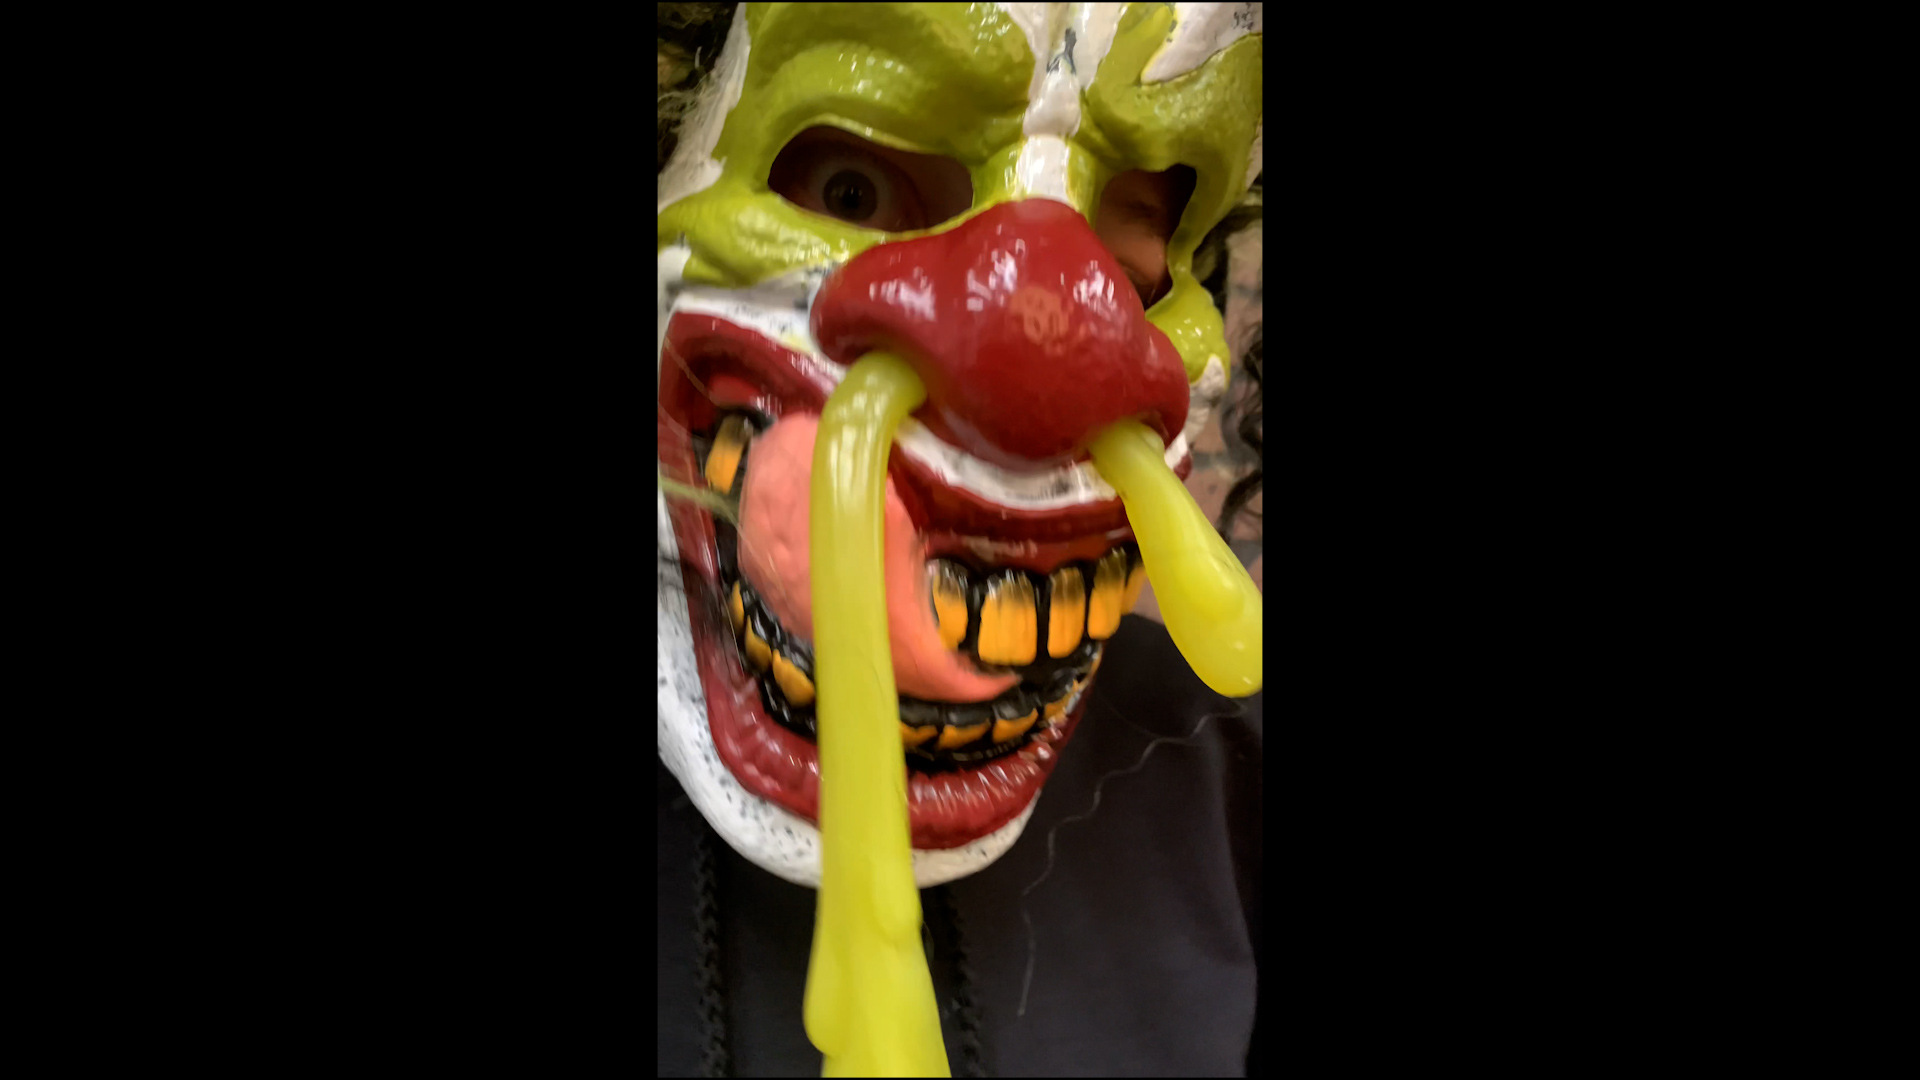 Be creepy and gross at the same time in this Boy's Boogers The Clown Costume. This scary boy's costume is great for Halloween or just a fun Saturday night.